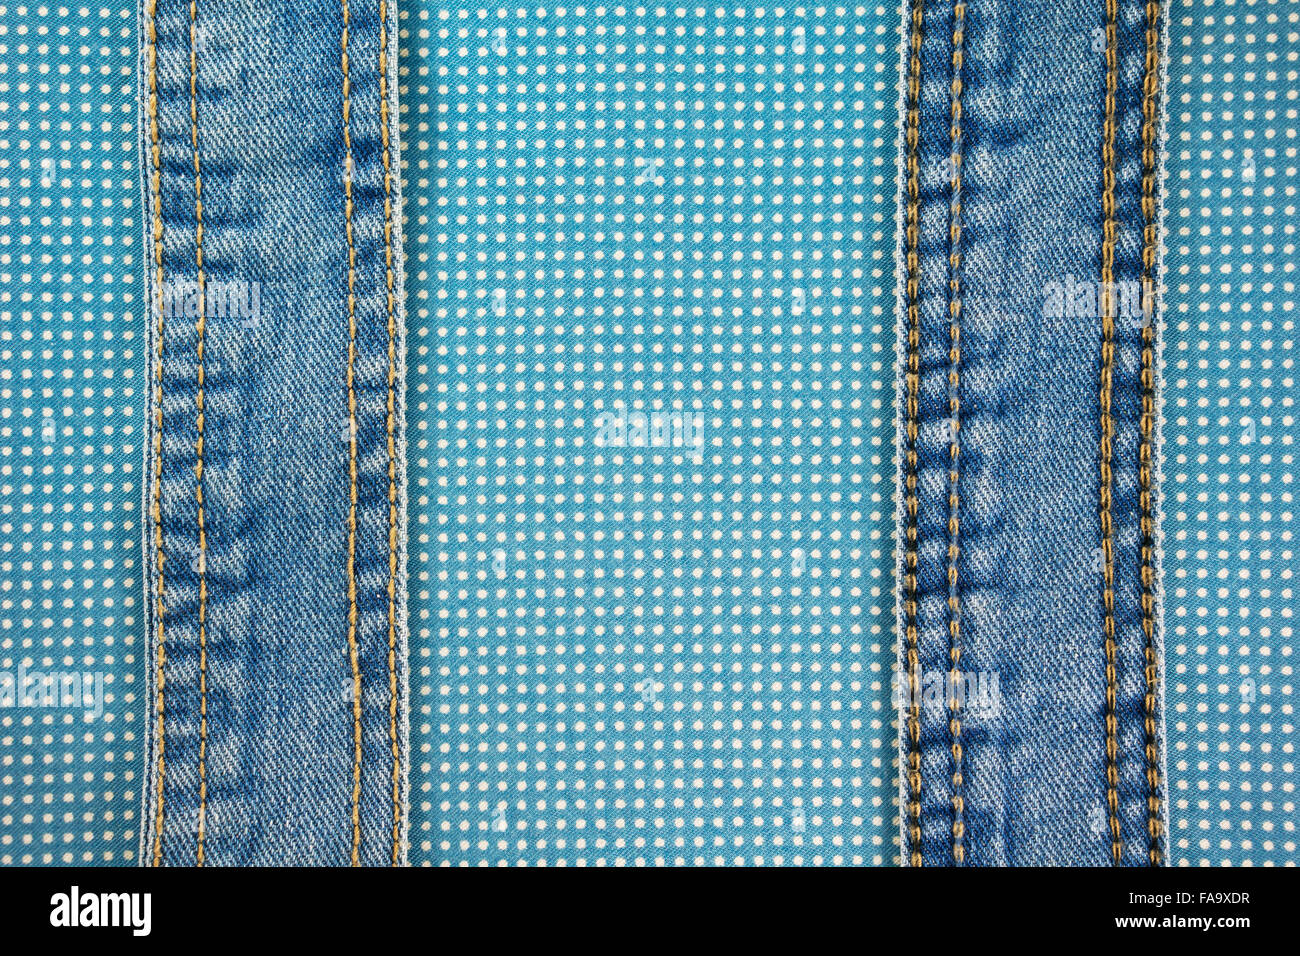 Jeans with stitch on blue dot cloth texture and background Stock Photo